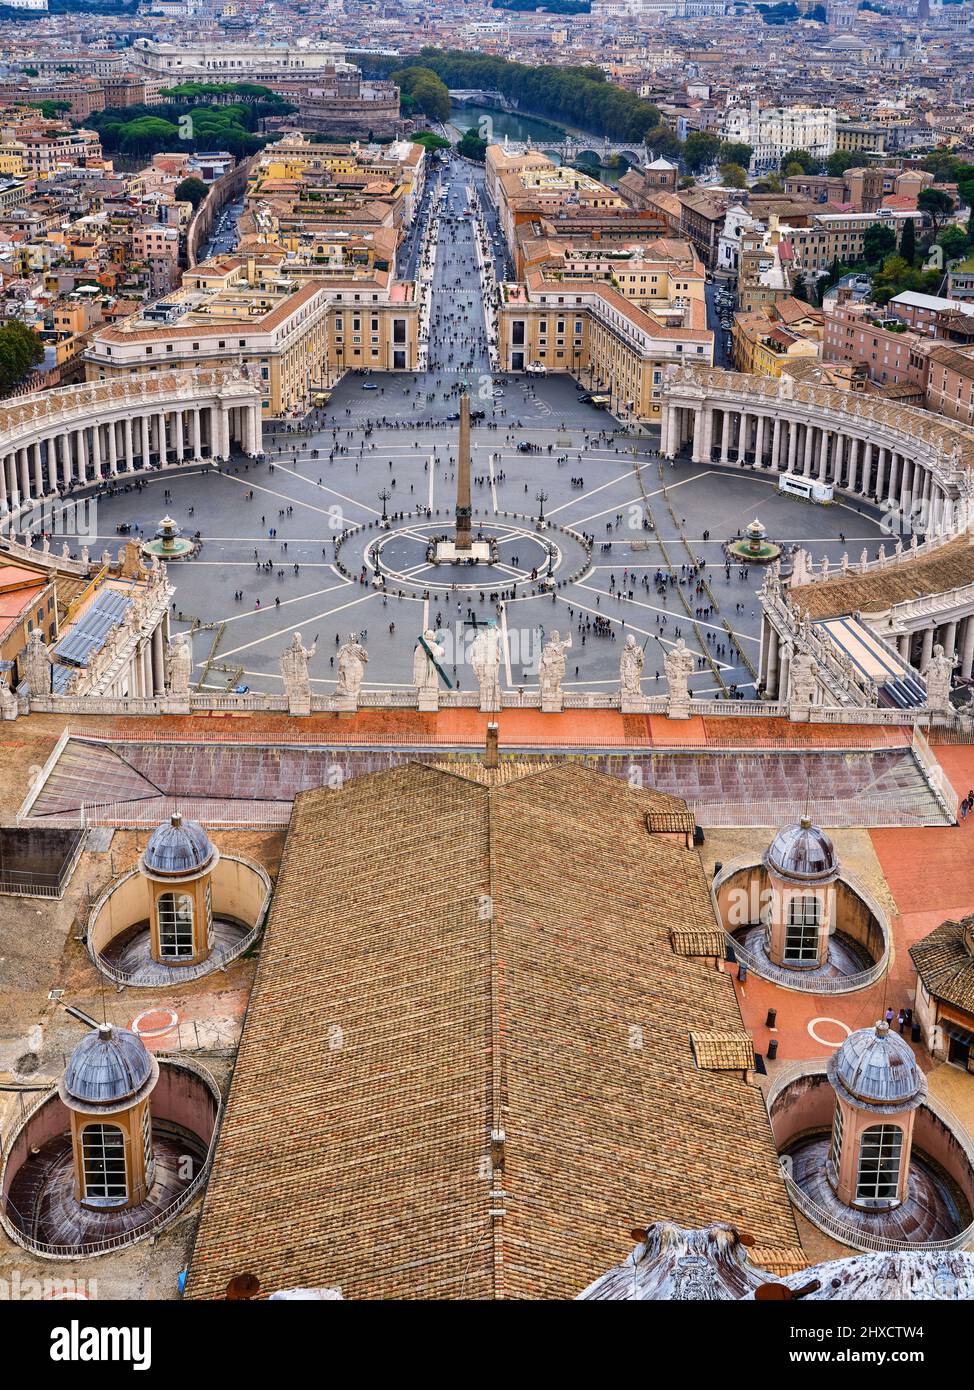 View of St. Peter's Square from the dome of St. Peter's Basilica Stock Photo